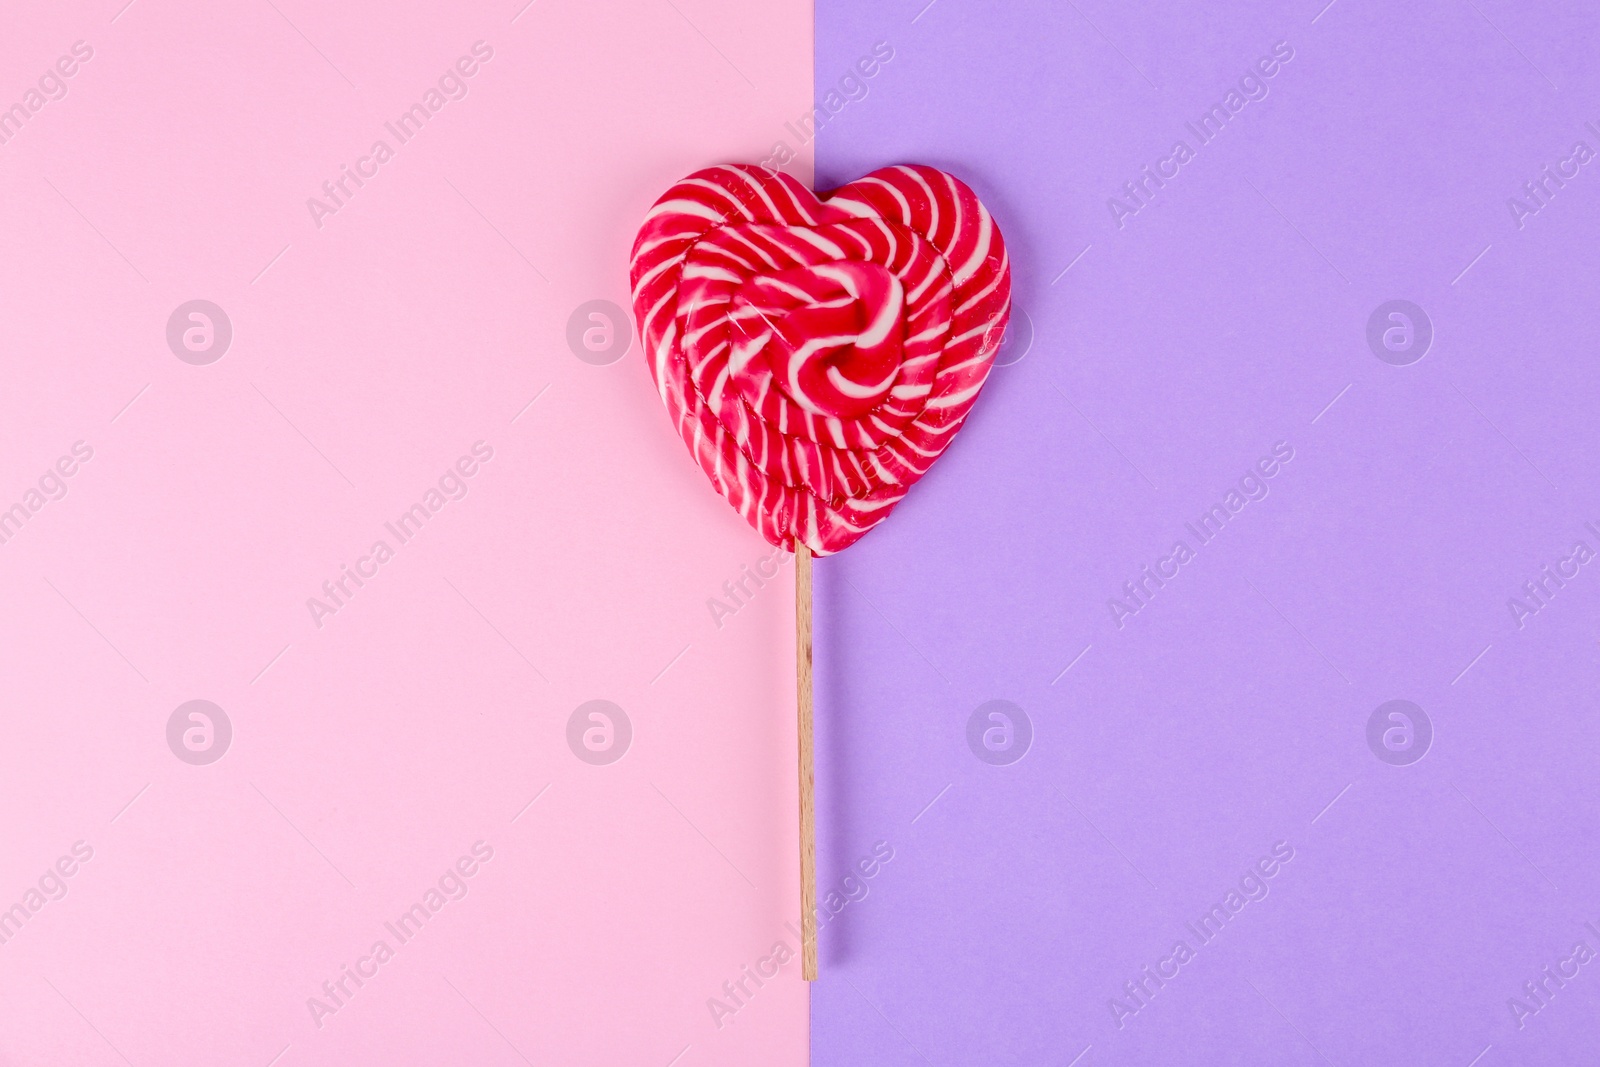 Photo of Heart shaped lollipop on color background, top view. Sweet love